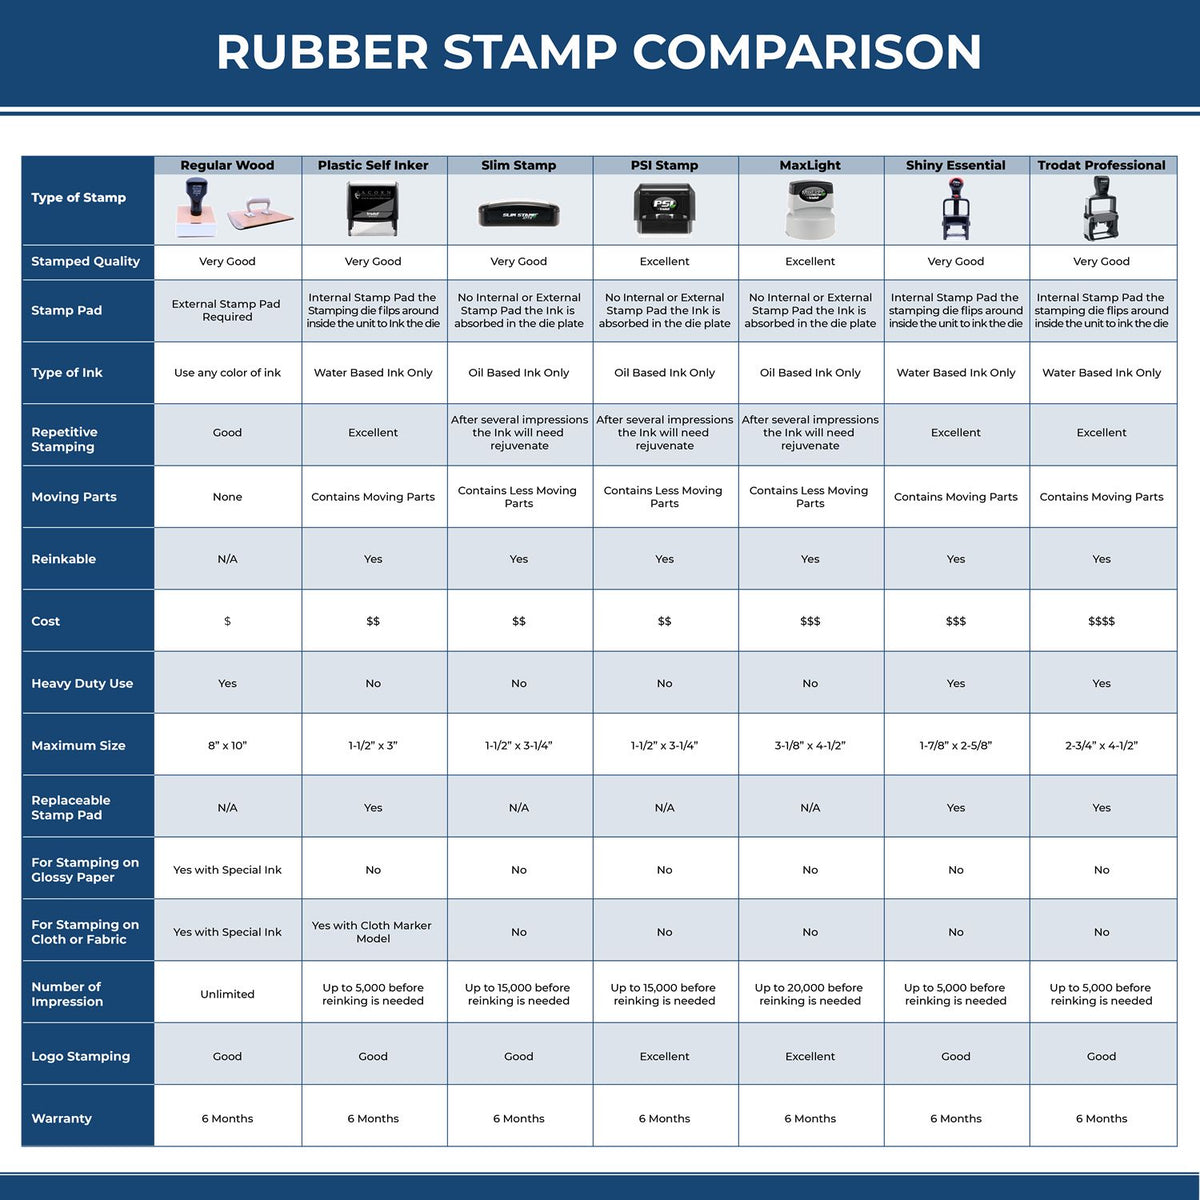 A comparison chart for the different types of mount models available for the Wooden Handle California State Seal Notary Public Stamp.